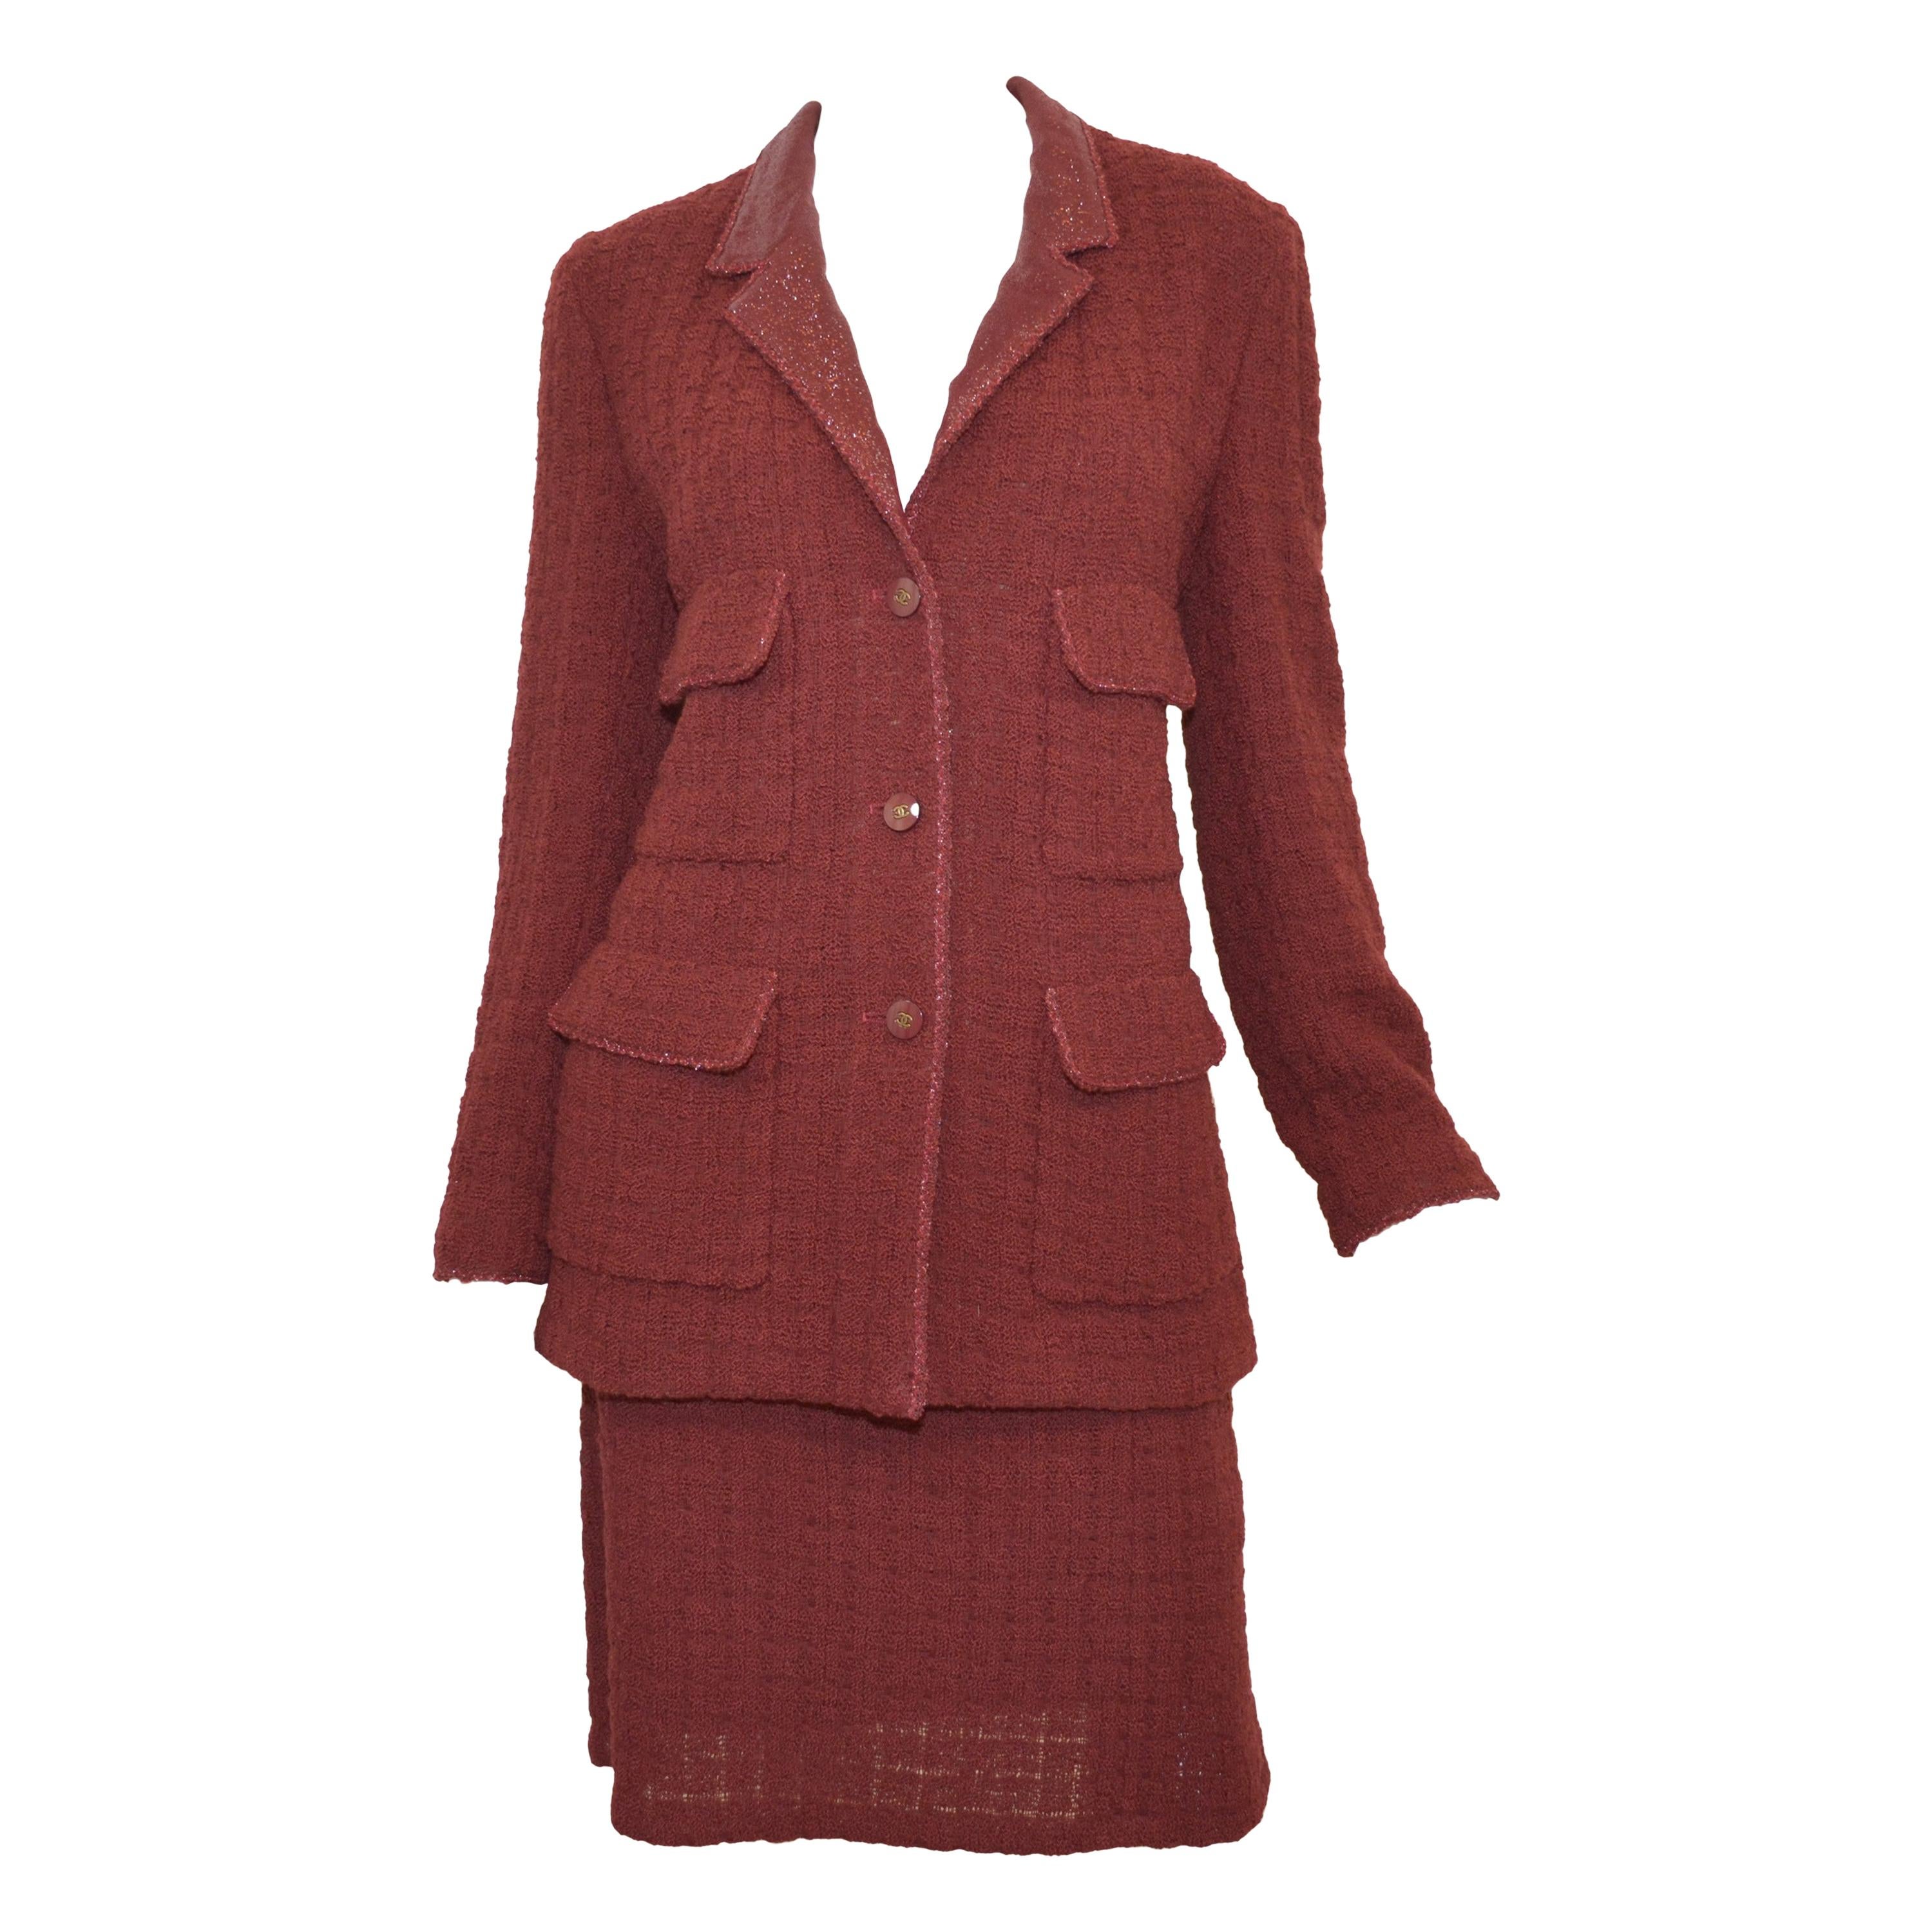 1998 A Chanel Maroon Knit Skirt with Jacket Set